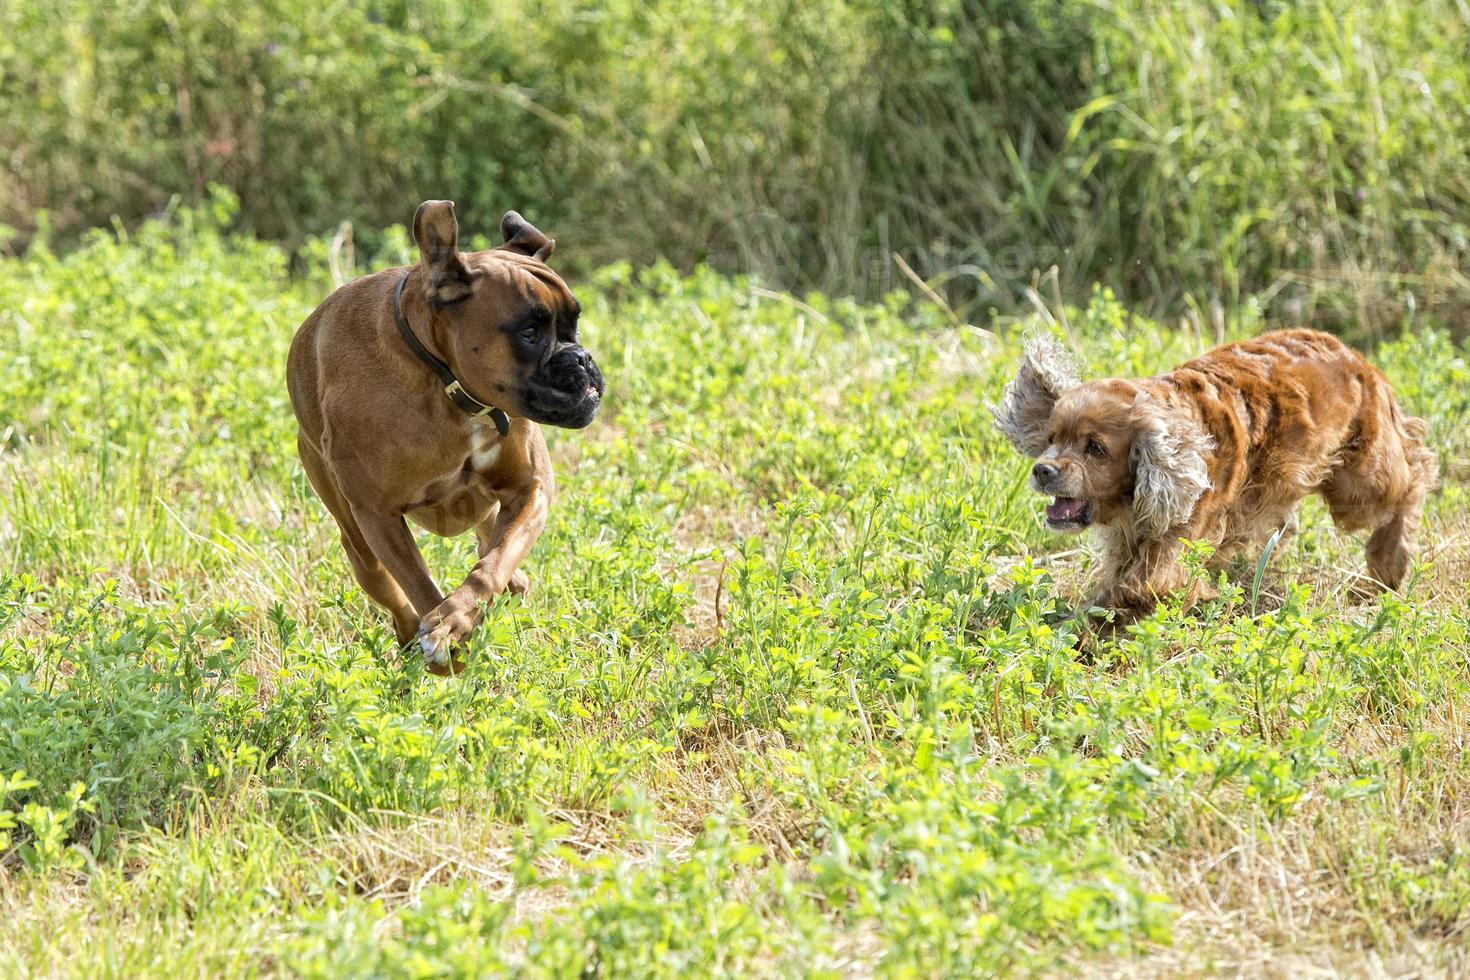 dogs while fighting on the grass photo